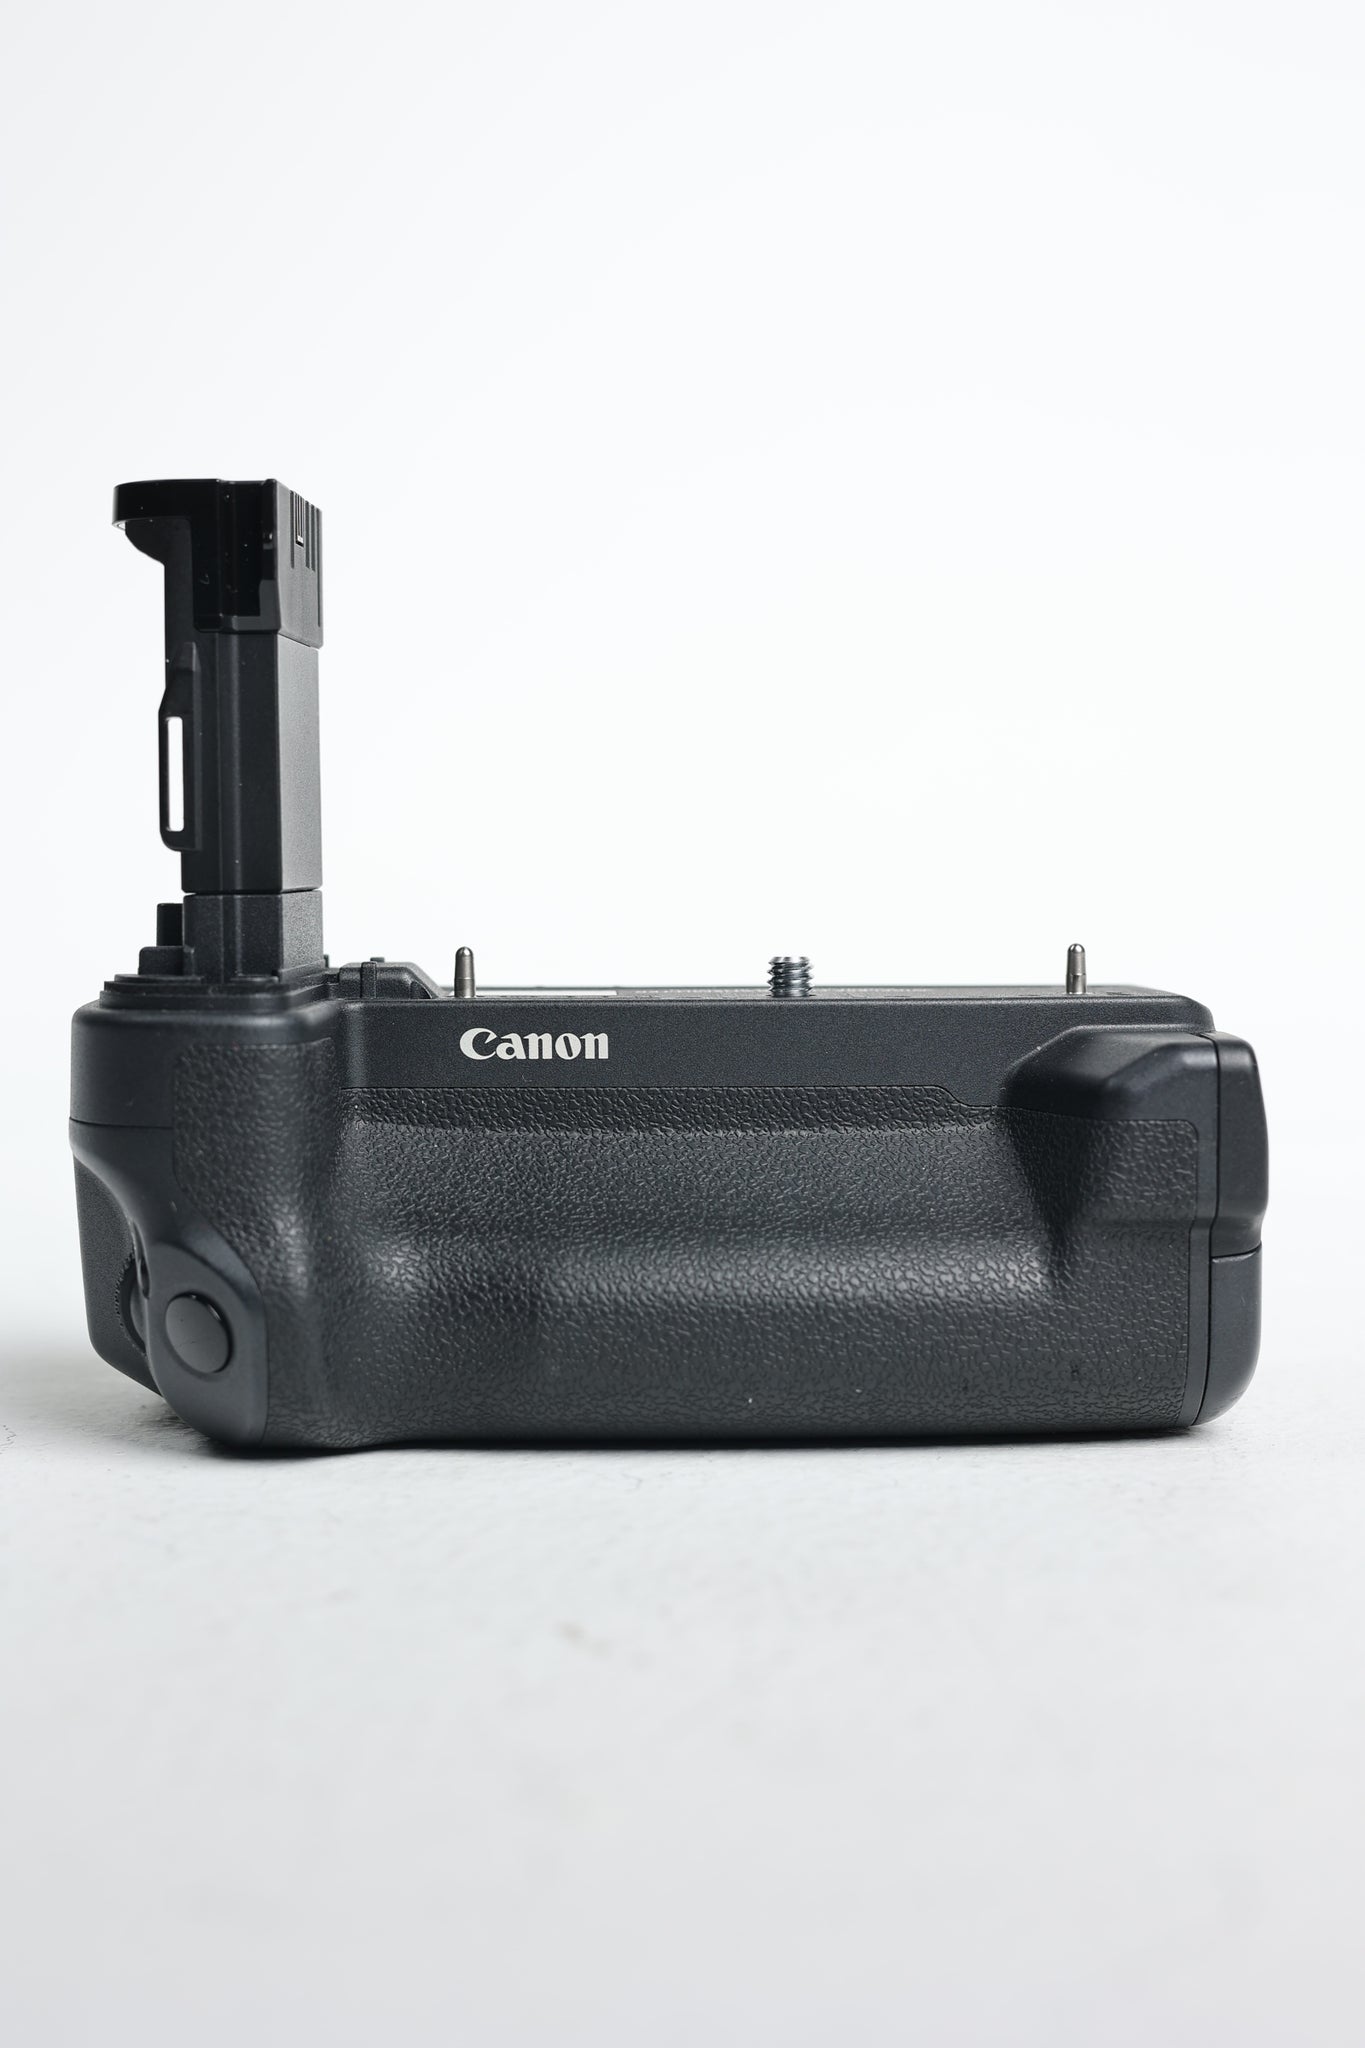 Canon WFTR10A Wireless File Transmitter, Used